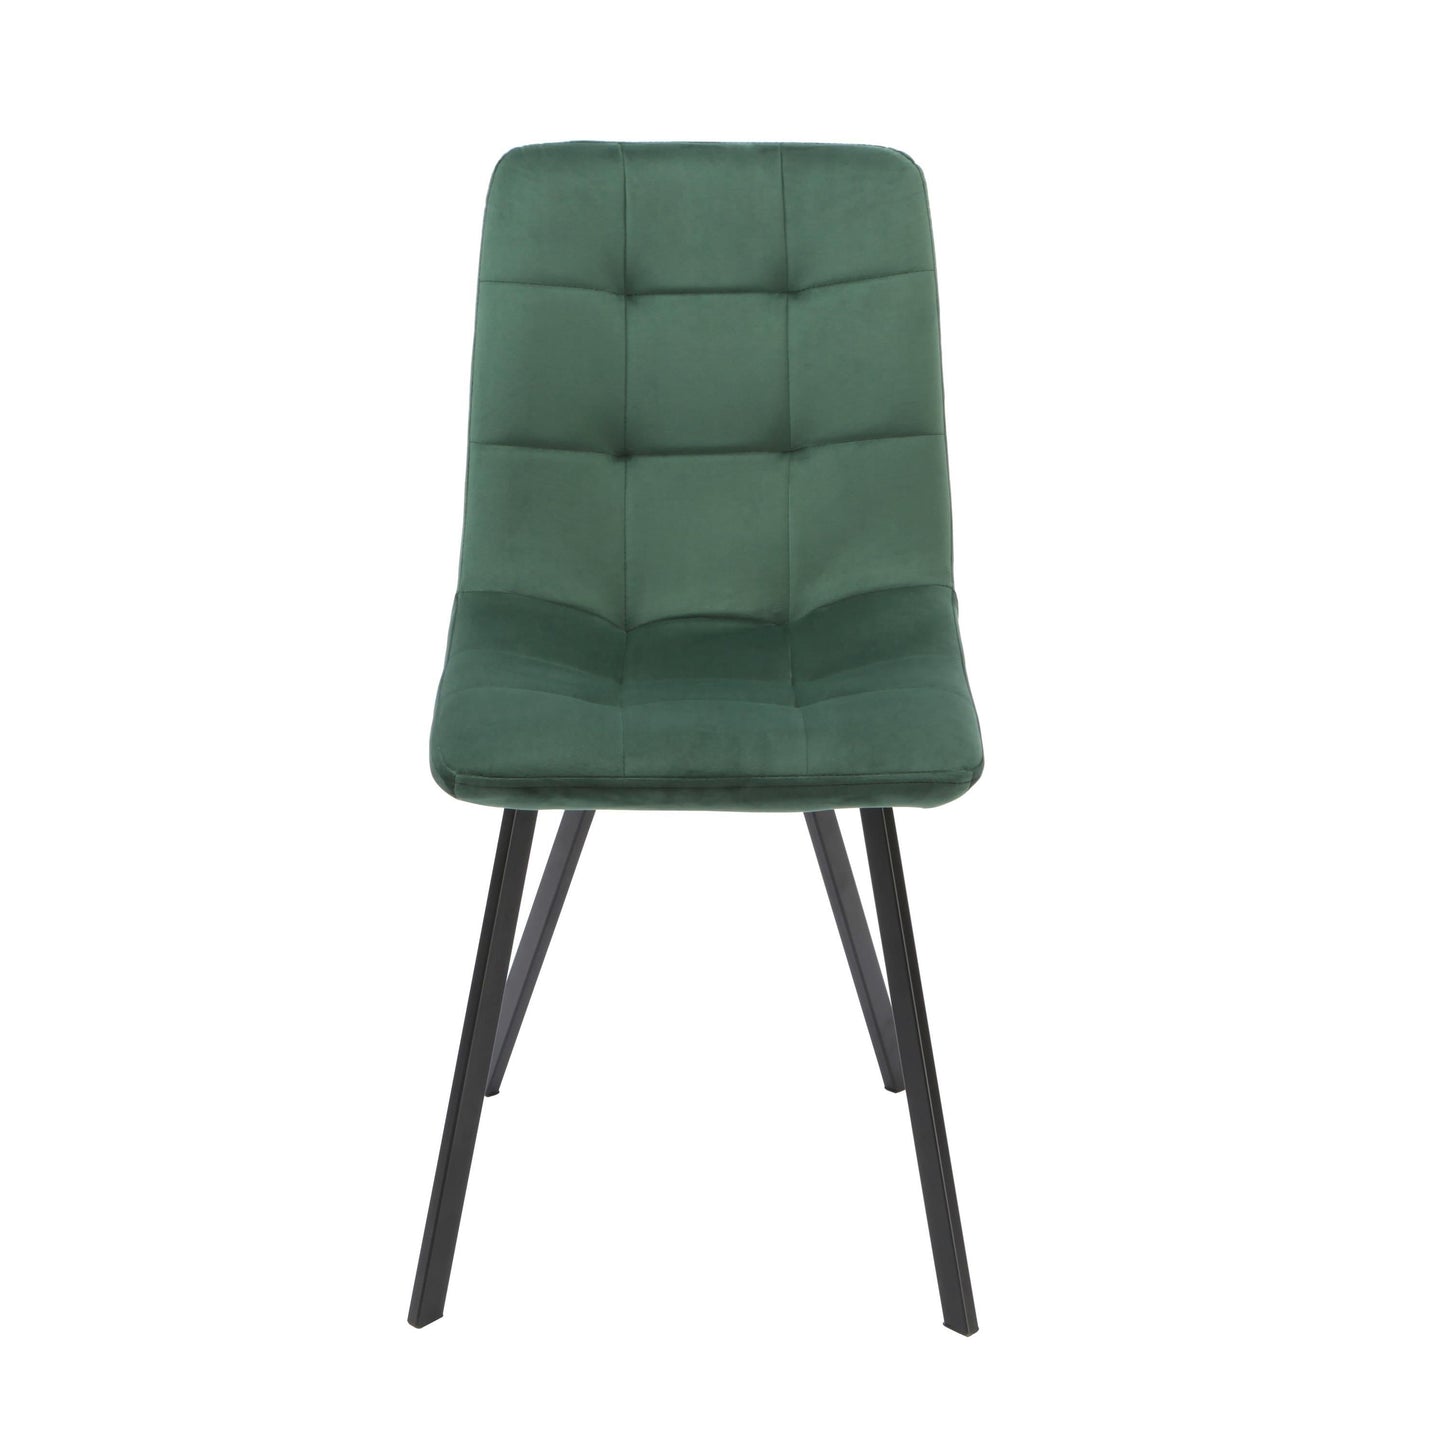 2 Set squared green dining chair by Native